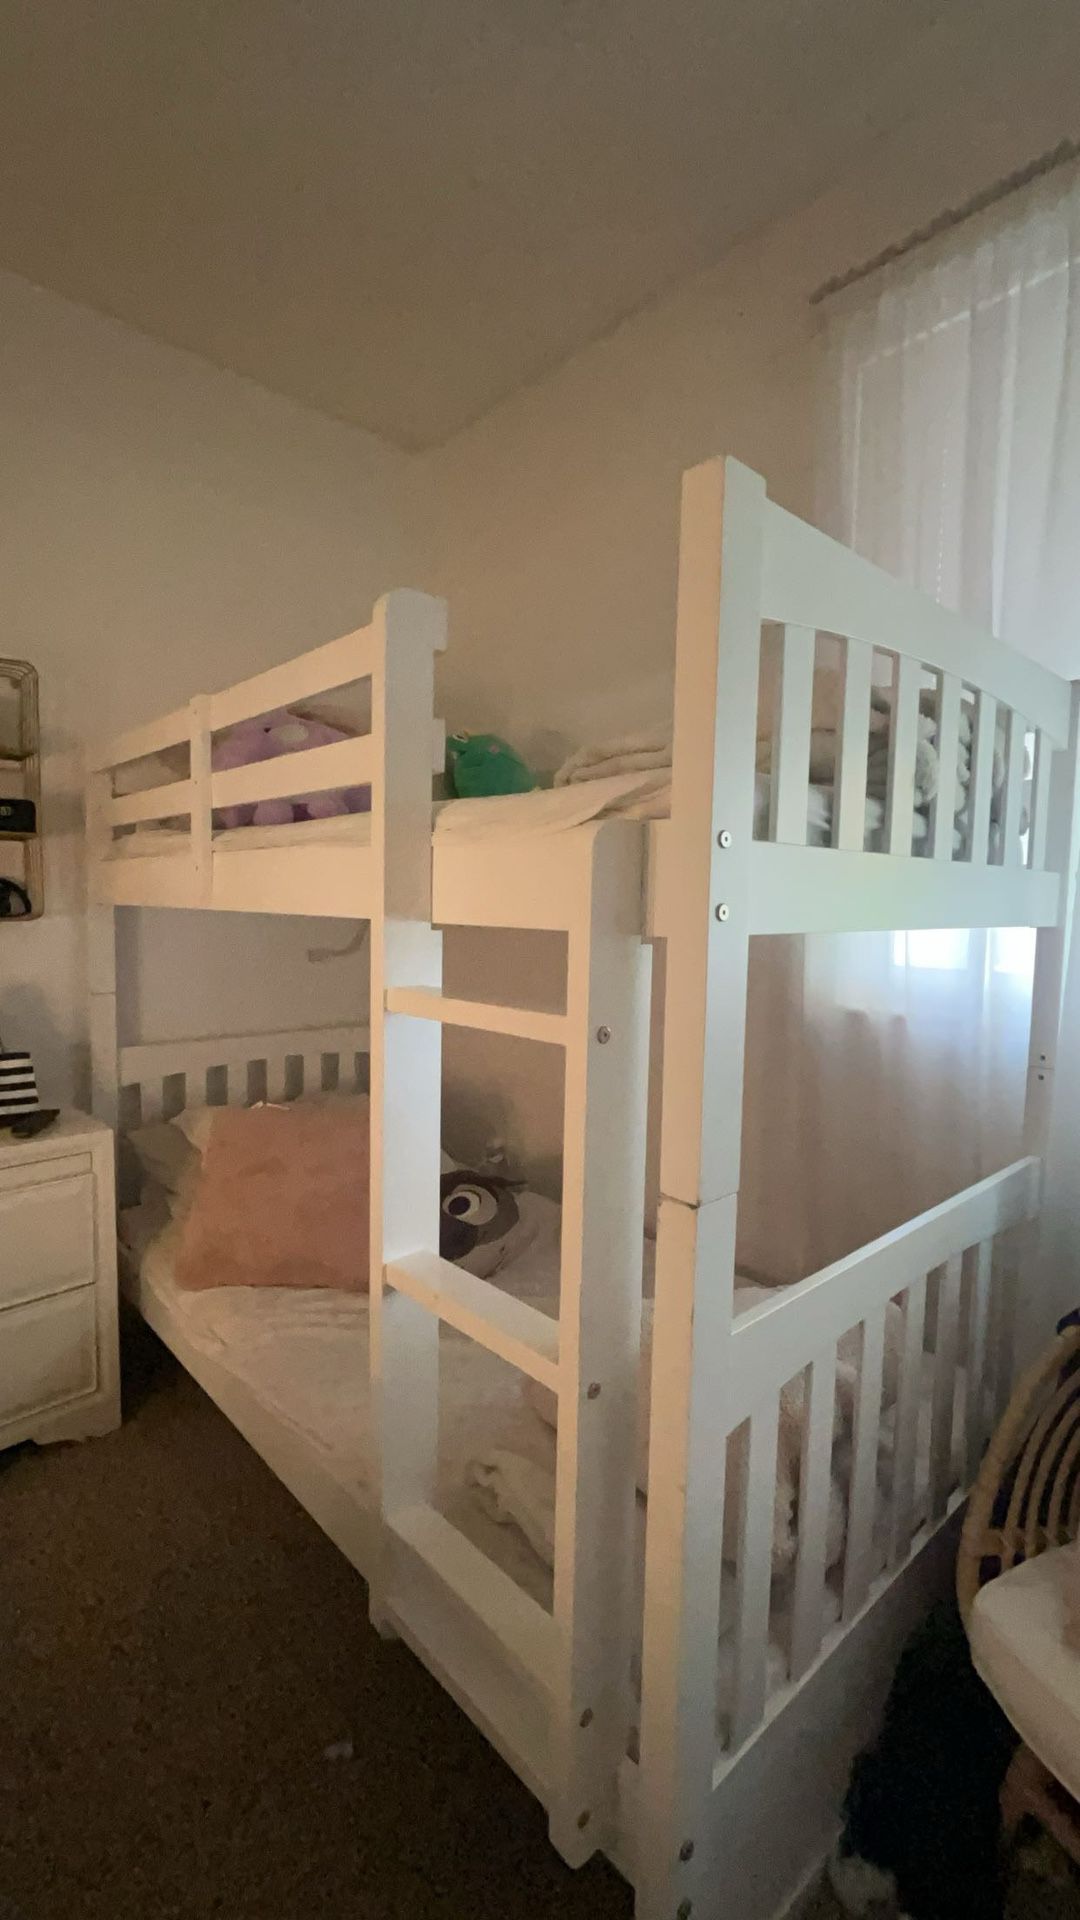 Bunk Bed Donation 